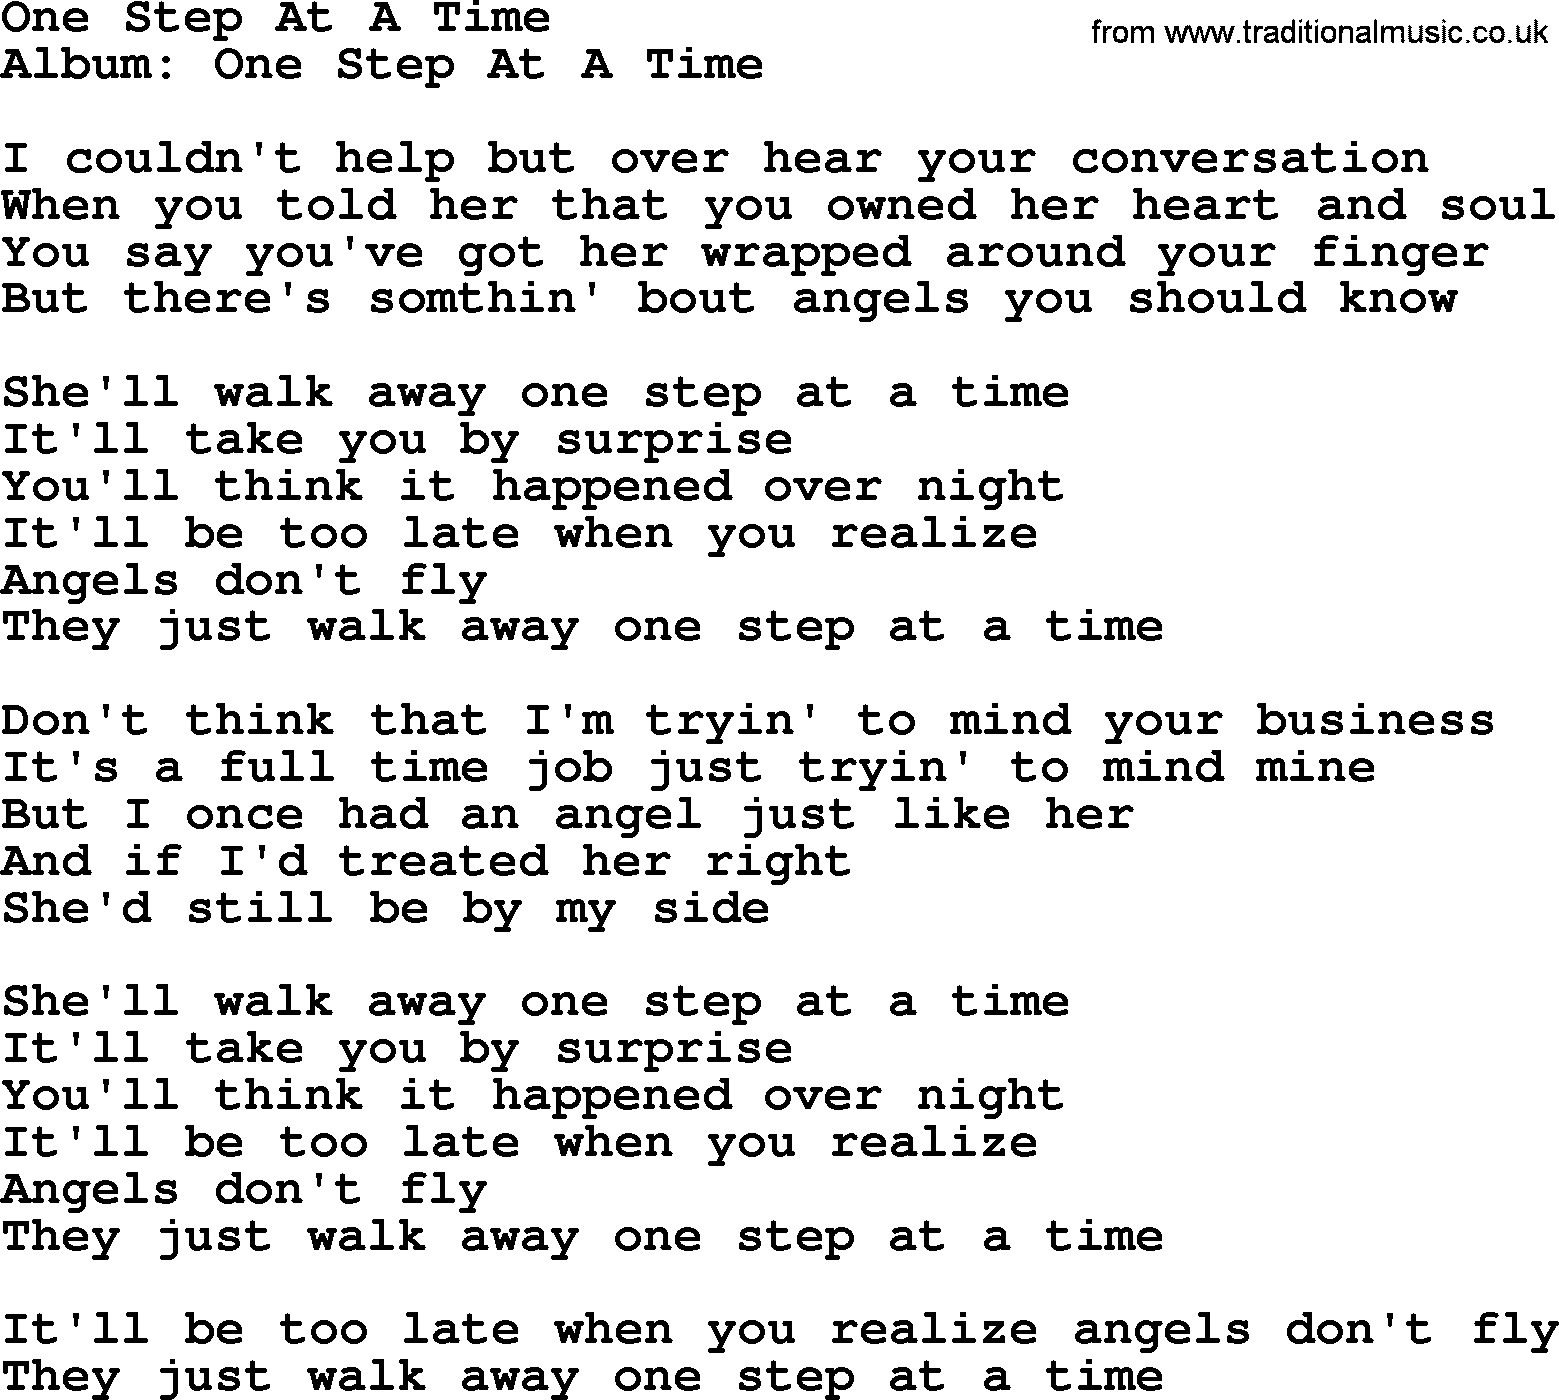 George Strait song: One Step At A Time, lyrics